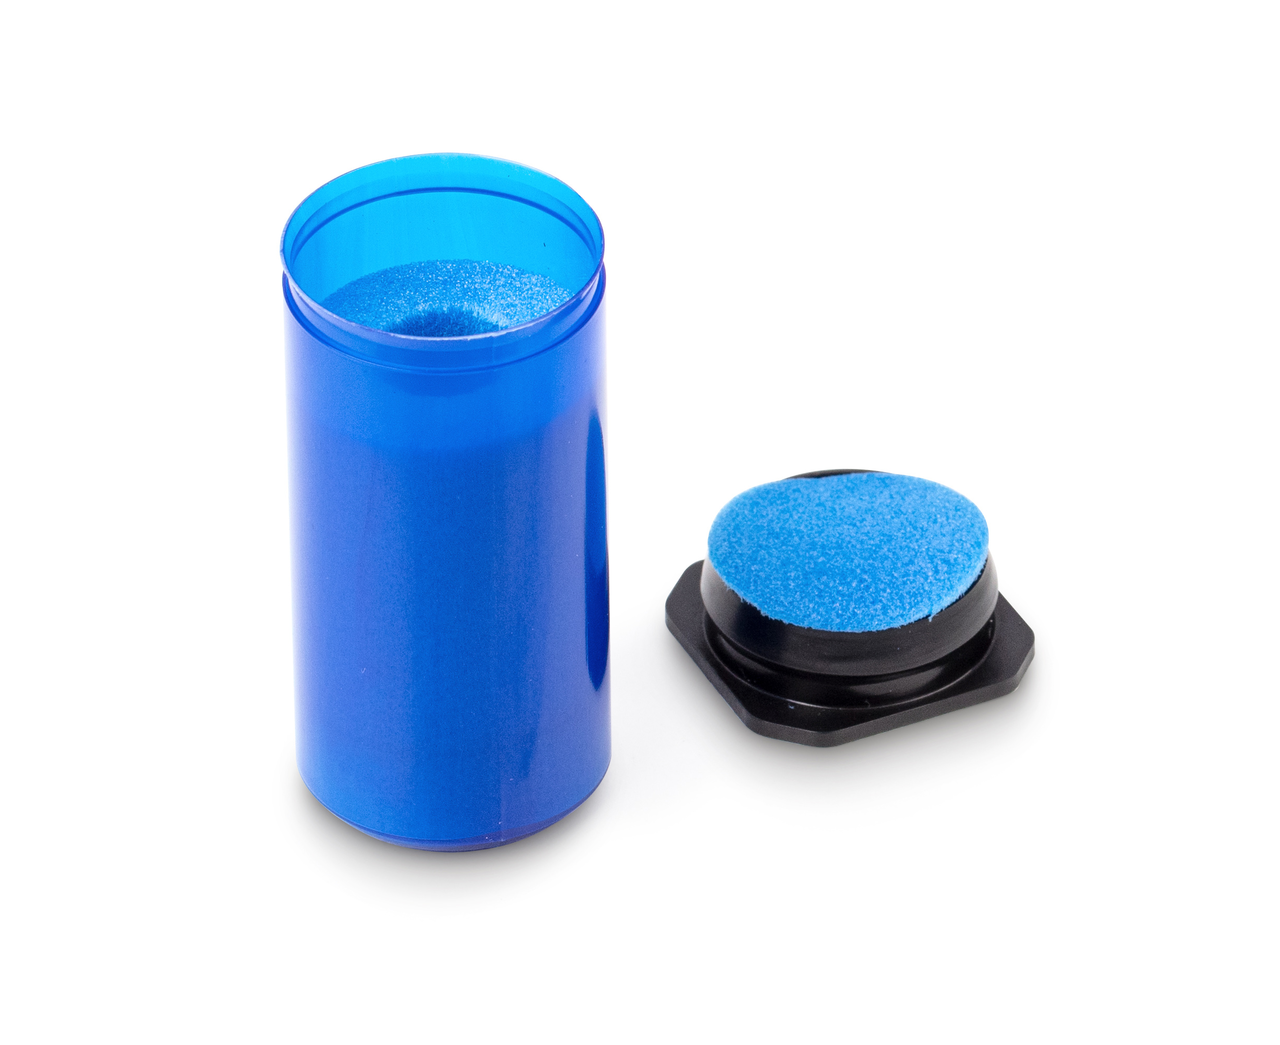 Plastic Weight Case, Button/Compact Weight, 10g